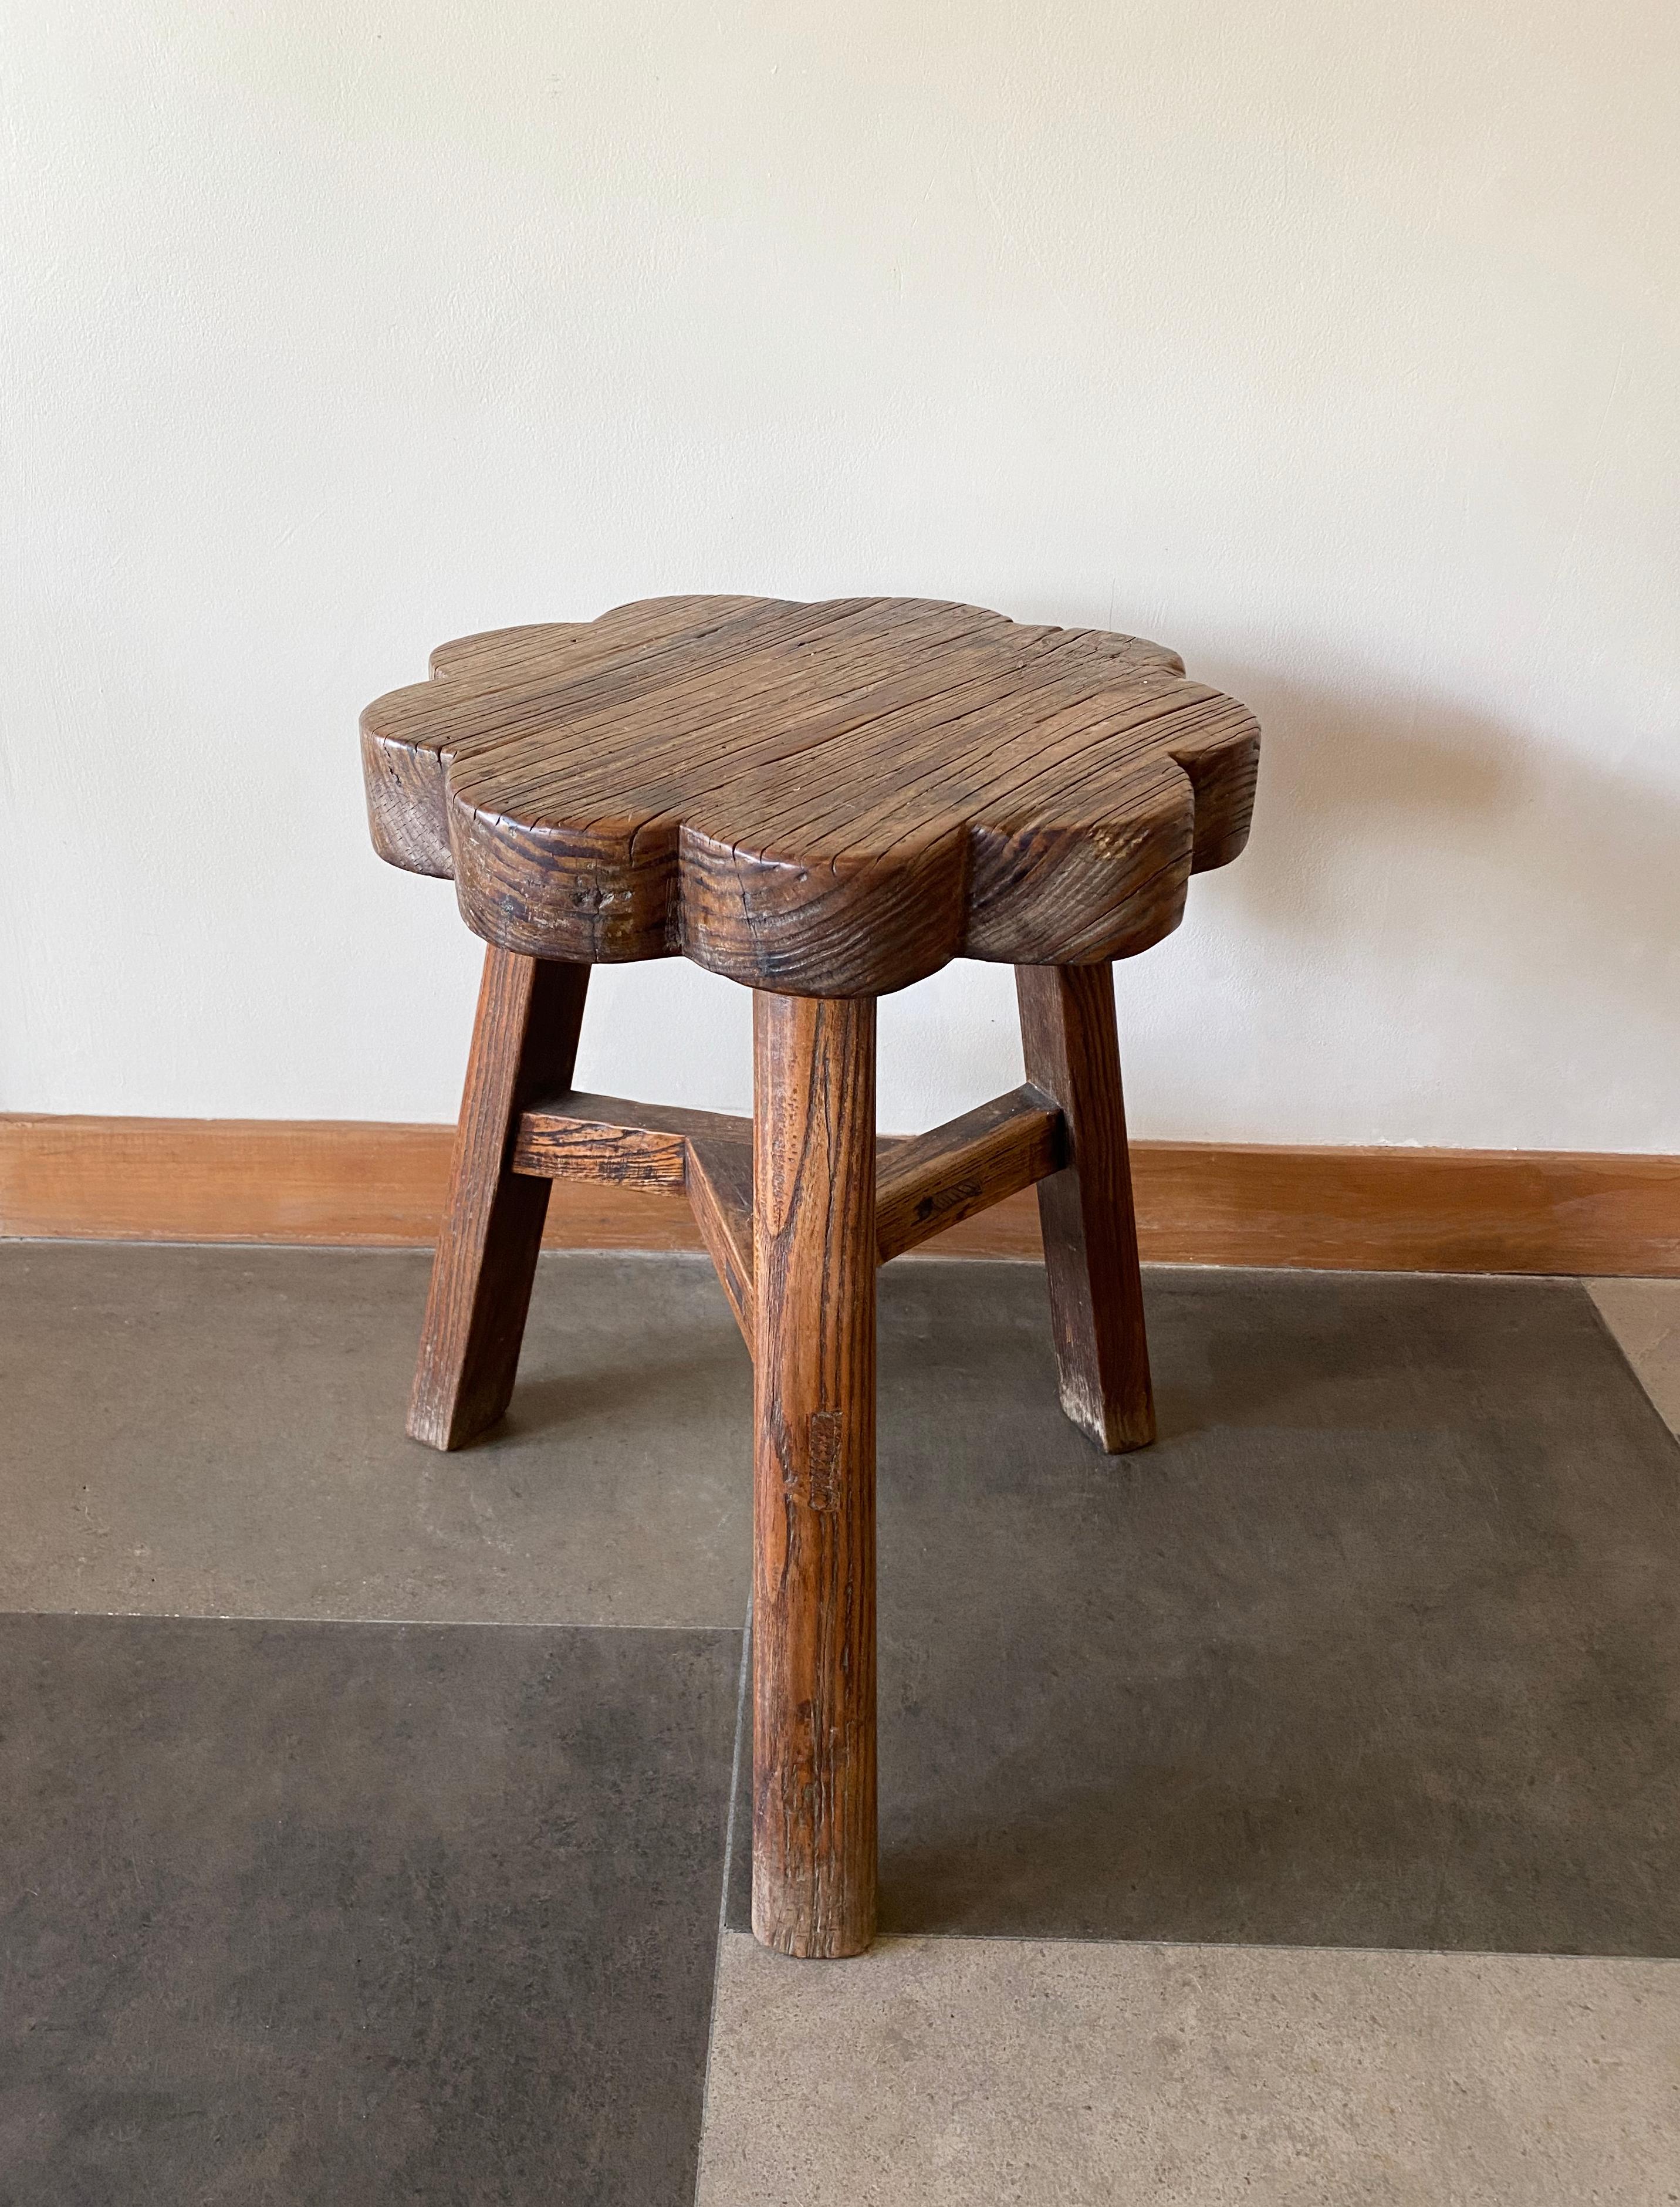 This antique elm wood stool comes from China's Hubei province. It was crafted using only wooden joints. The elm wood has aged beautifully over its more than 100 years of life. 

Dimensions: Height 52cm x diameter 40cm.